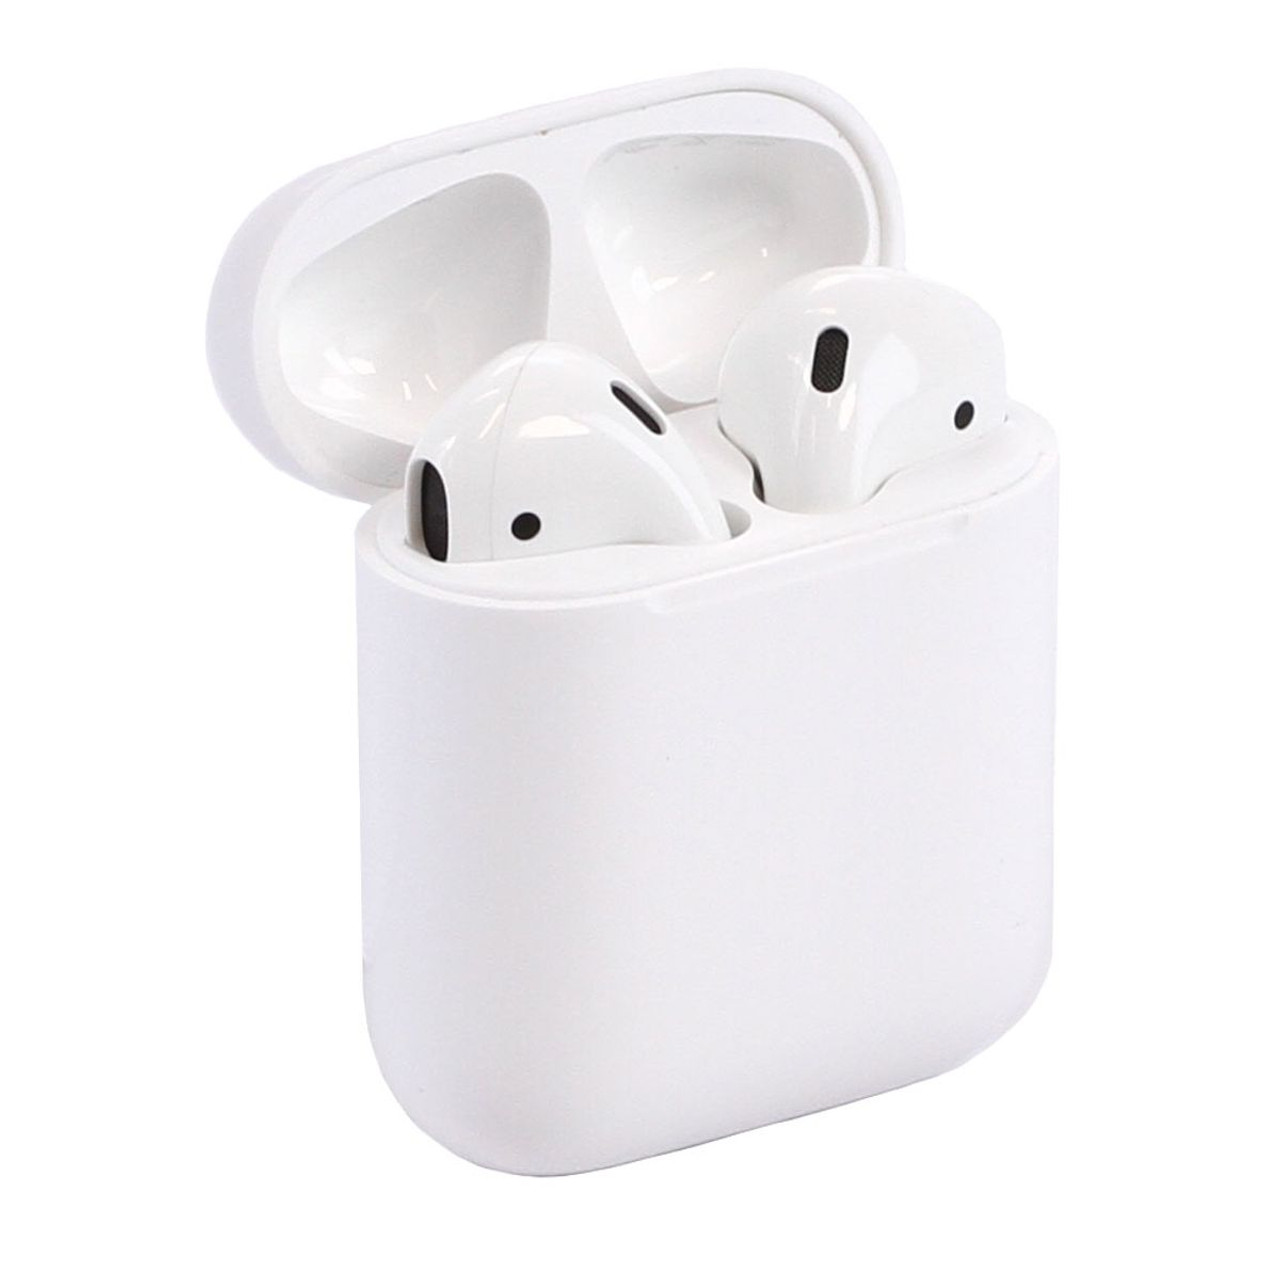 Apple® AirPods (2nd Gen) with Charging Case product image